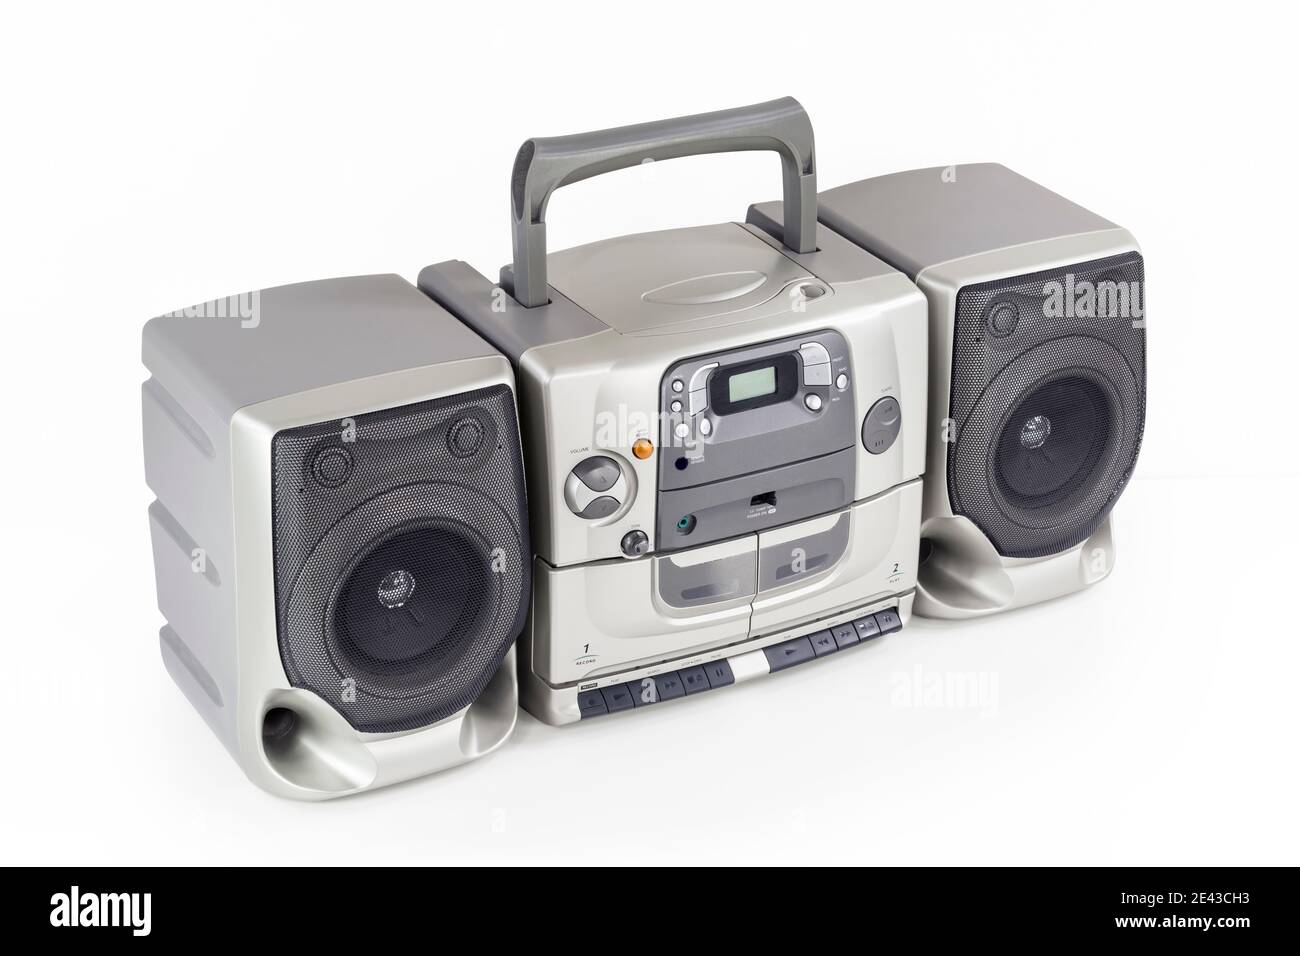 Big boom box vintage portable stereo radio, cd, cassette tape player and recorder on white. Stock Photo